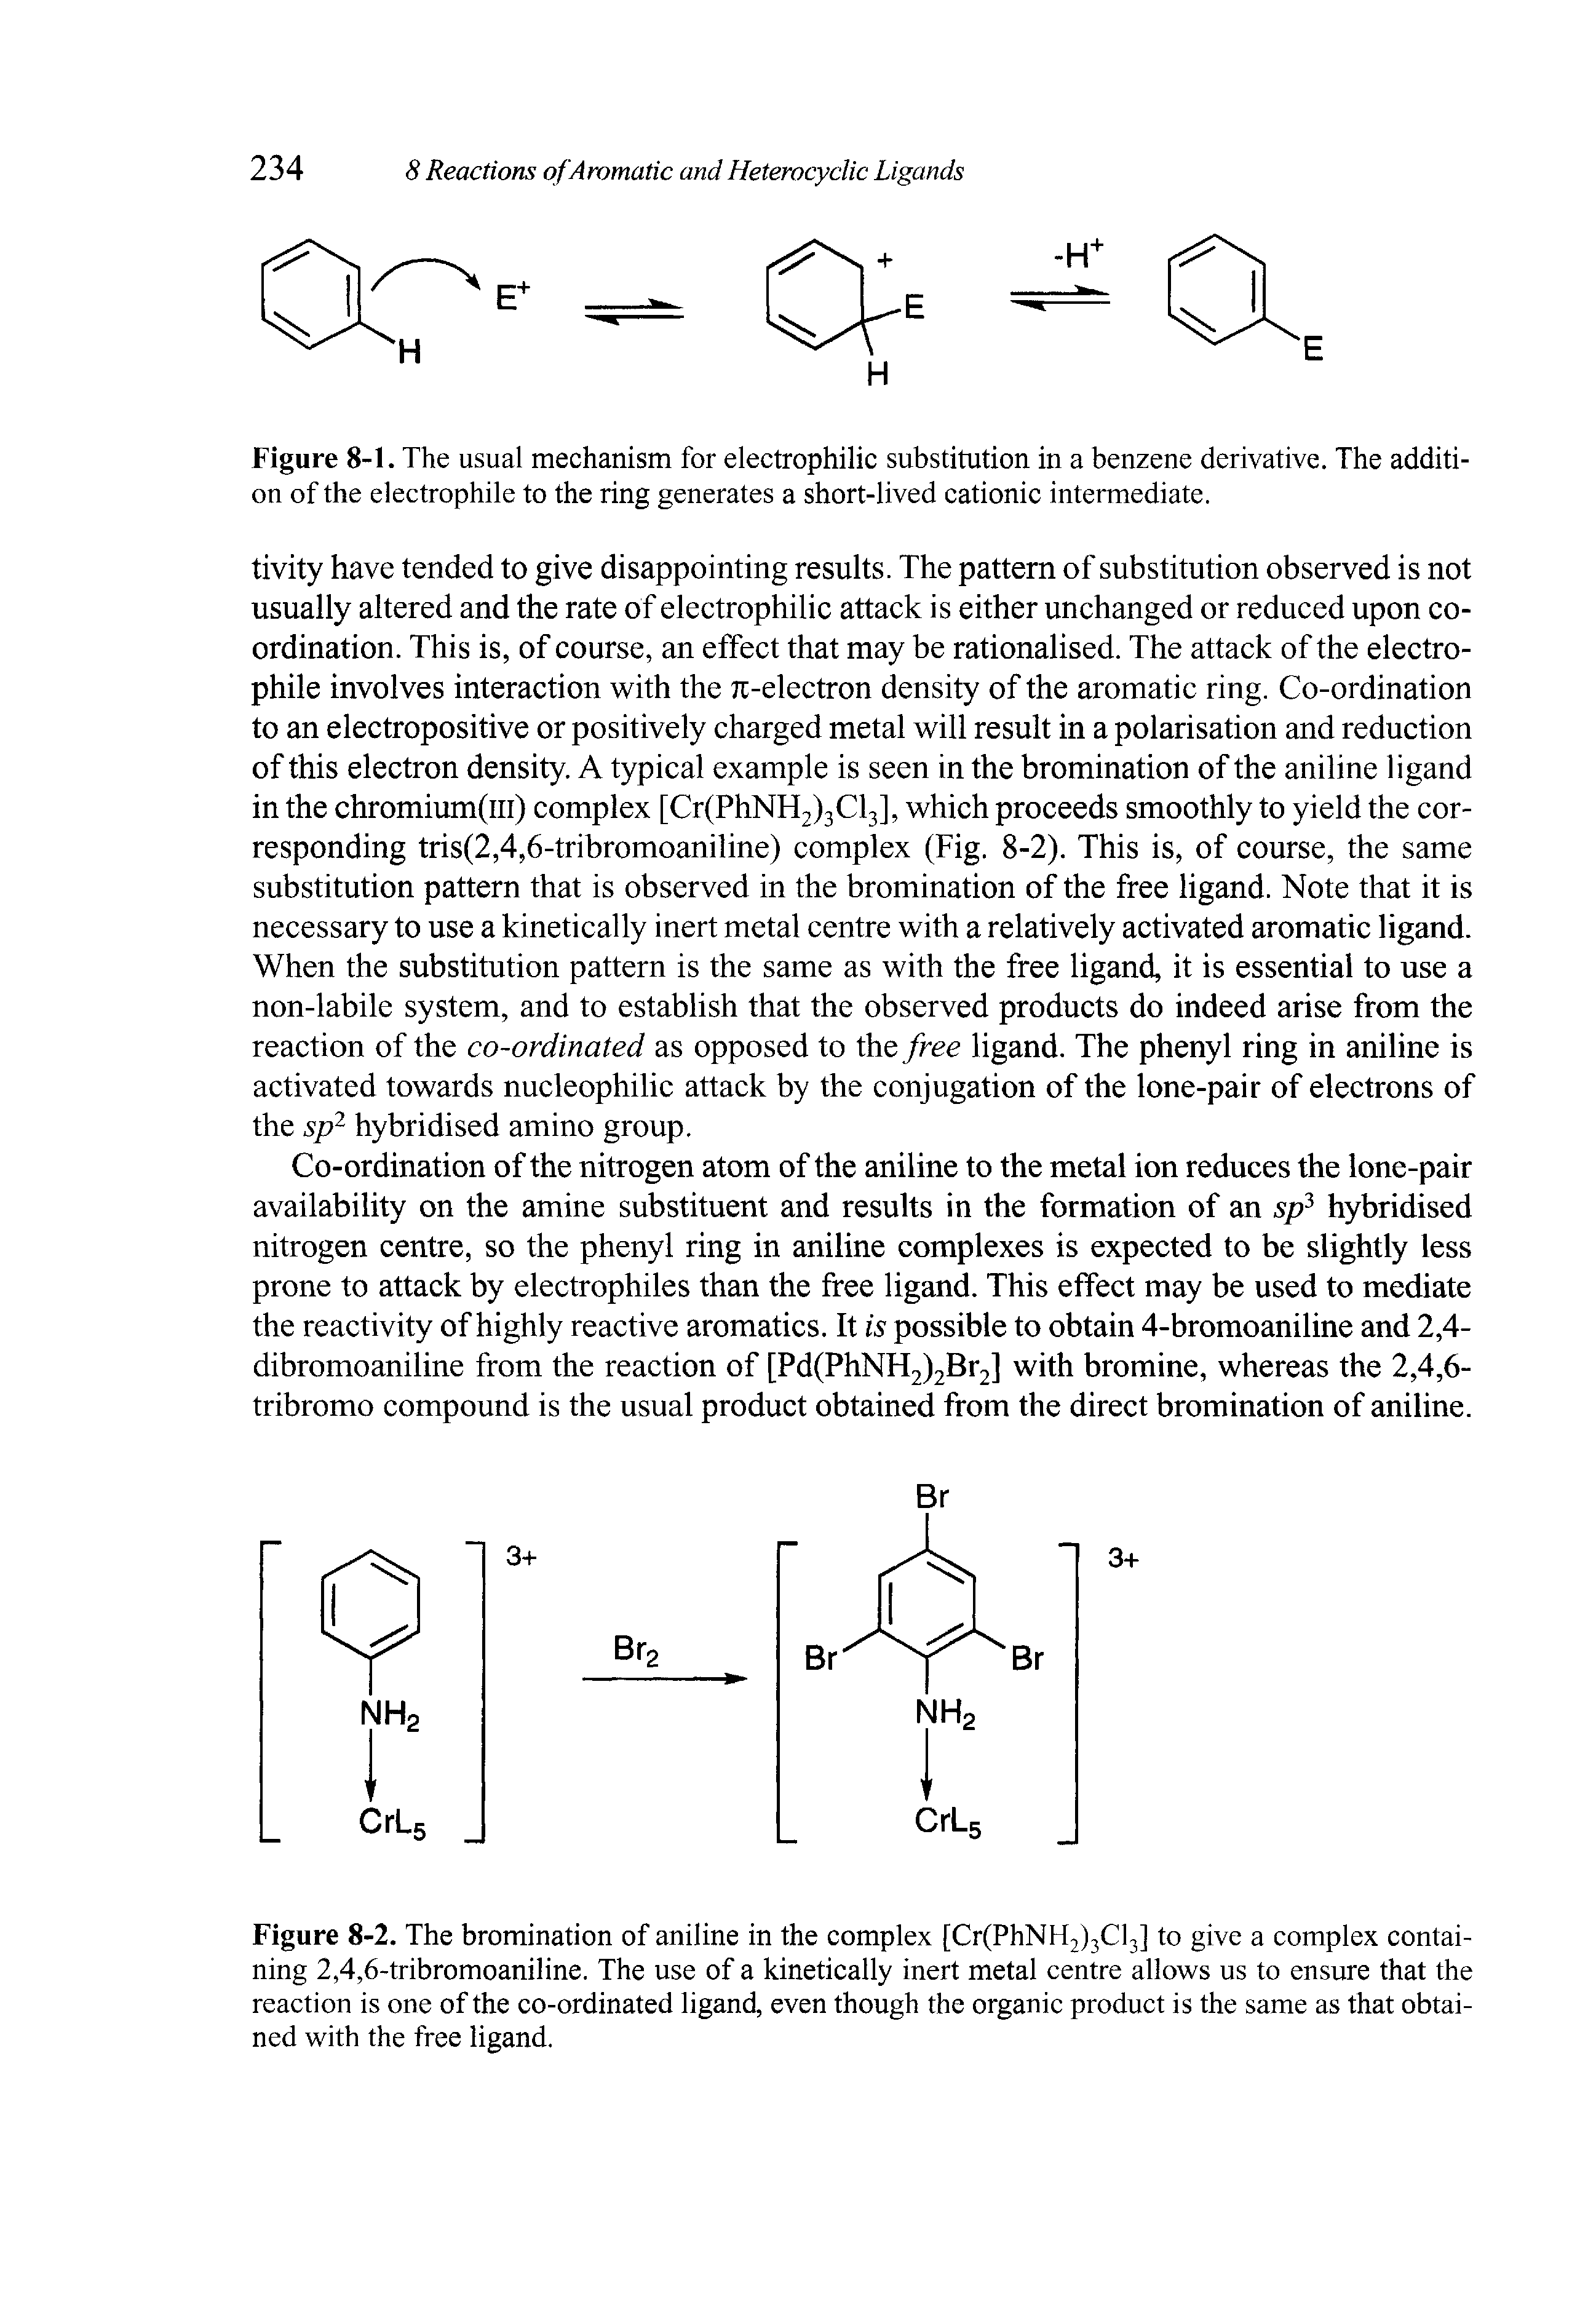 Figure 8-2. The bromination of aniline in the complex [Cr(PhNH2)3Cl3] to give a complex containing 2,4,6-tribromoaniline. The use of a kinetically inert metal centre allows us to ensure that the reaction is one of the co-ordinated ligand, even though the organic product is the same as that obtained with the free ligand.